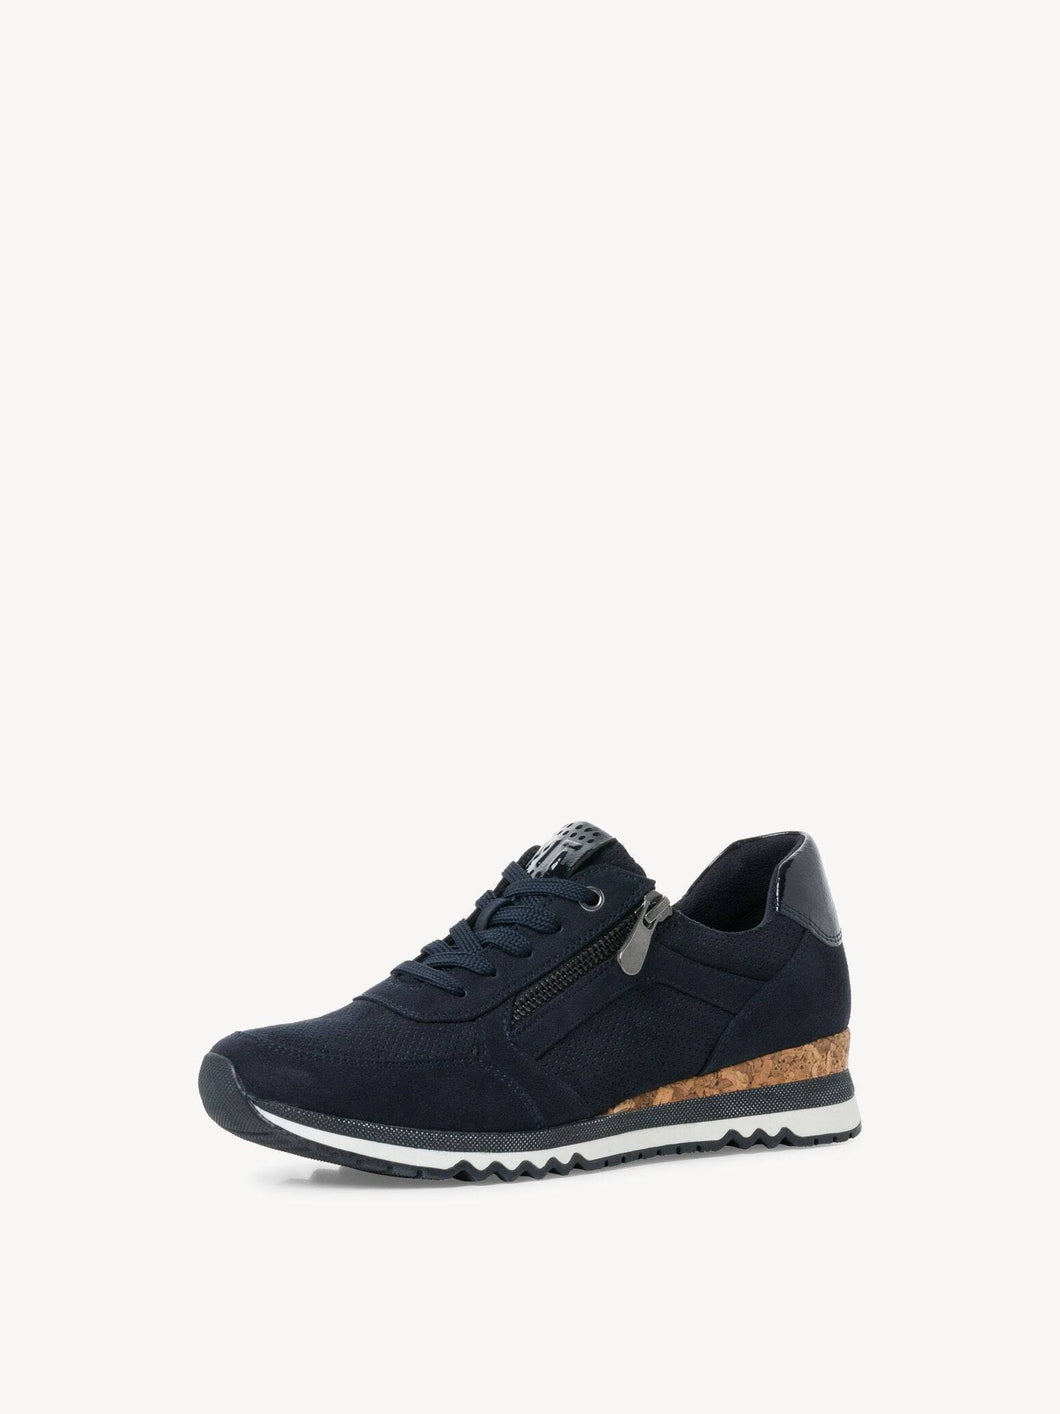 Marco Tozzi Navy Perforated Zip & Lace Up Trainer